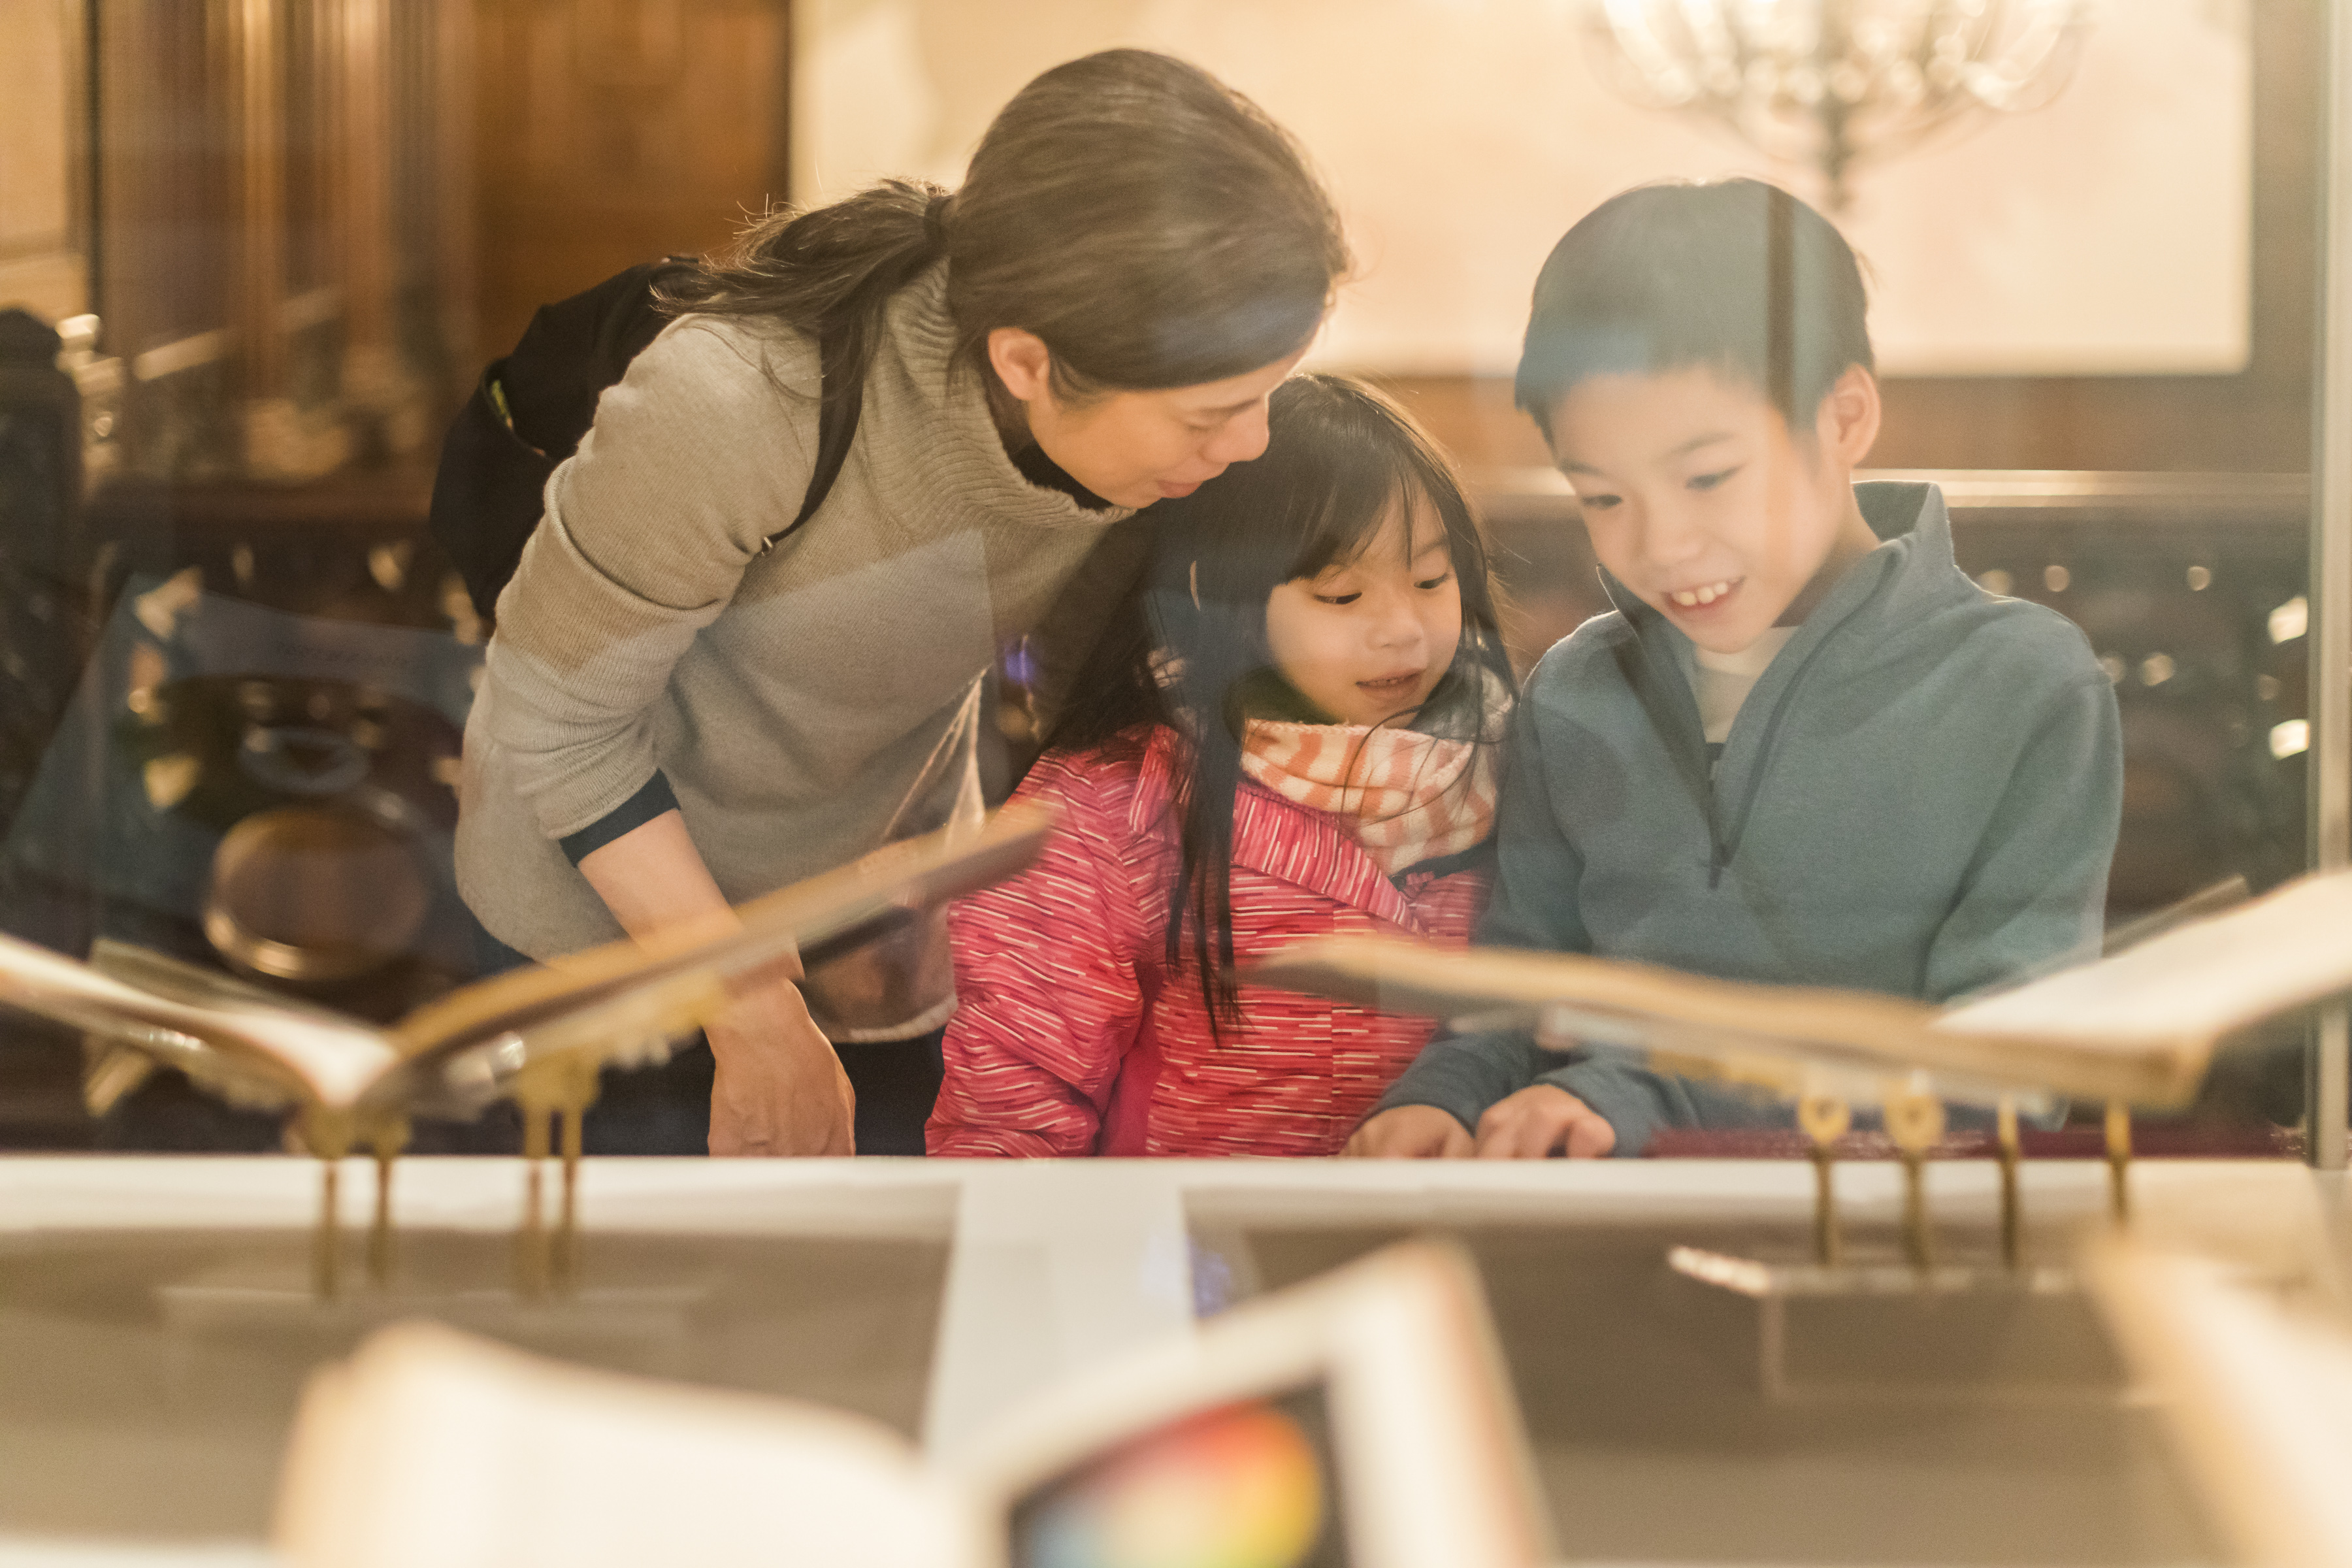 Morning at the Museum. A mother and her two children stand looking into a glass case with colorful books open on display.